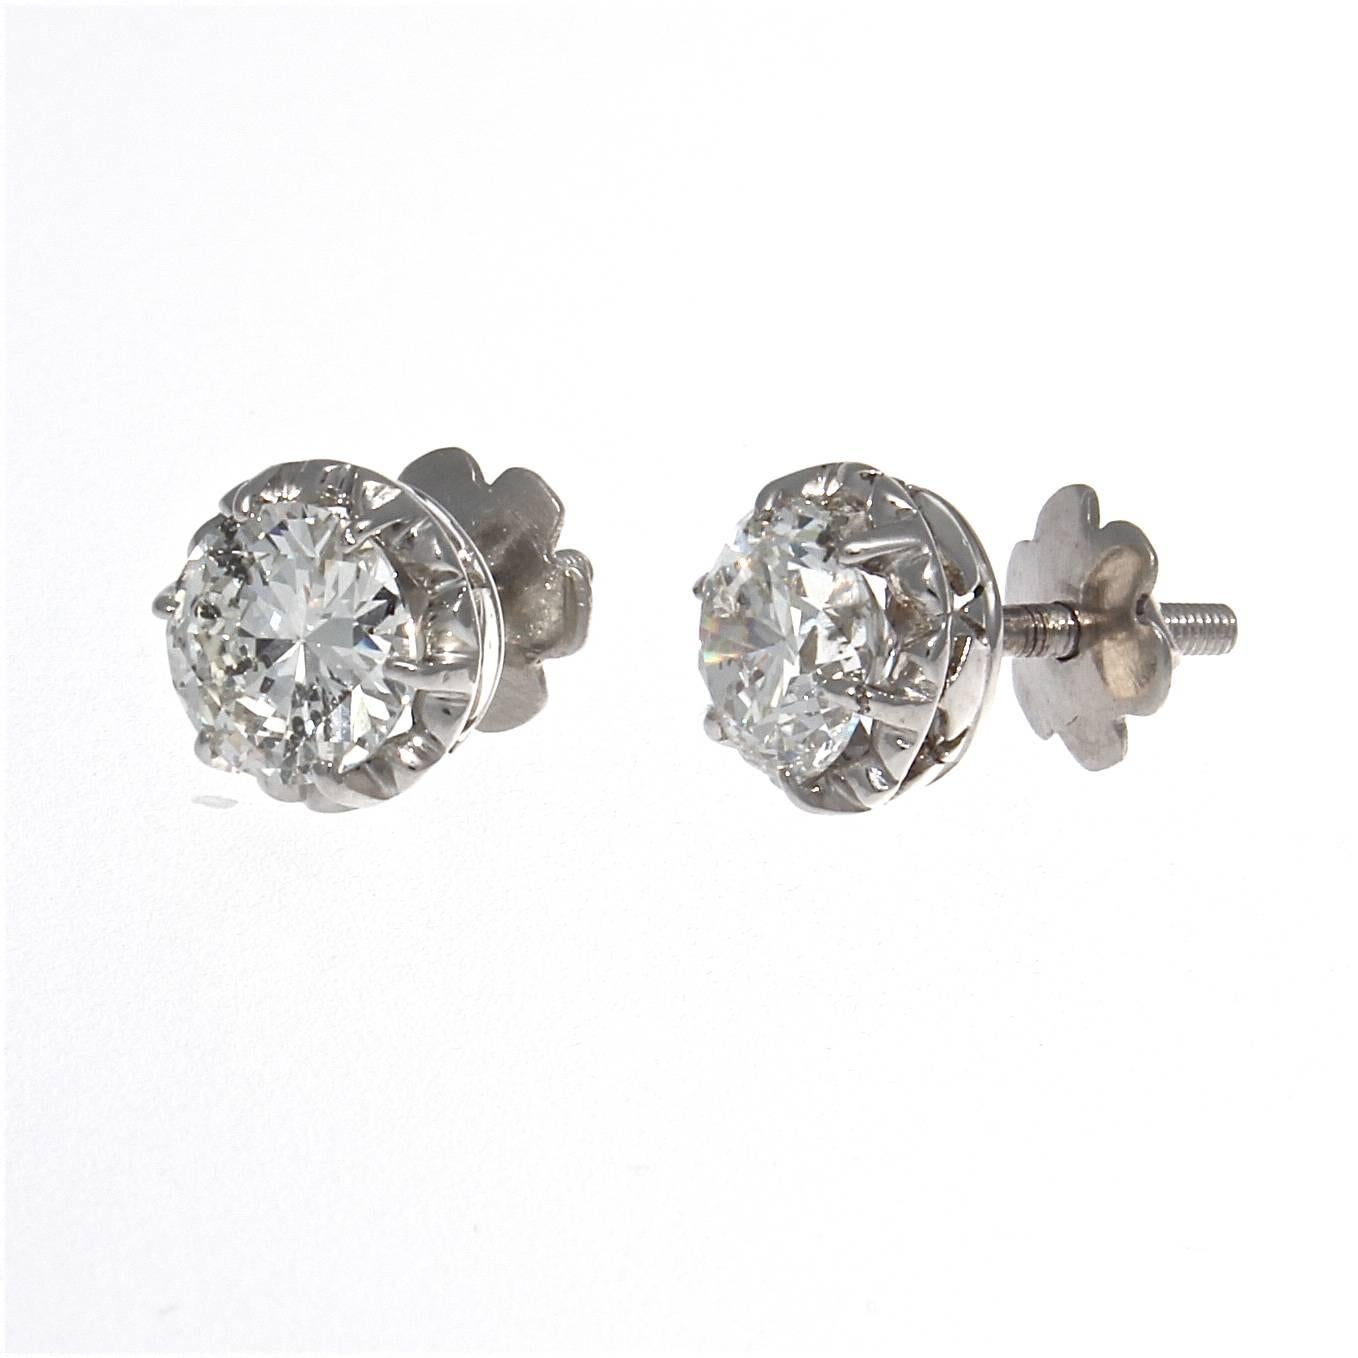 A beautiful pair of diamond stud earrings. Created with two round brilliant cut diamonds that weigh 2.12 carats total and are F-G in color, SI2 in clarity. The designer has creatively added an outer circle of platinum nicely complimenting the